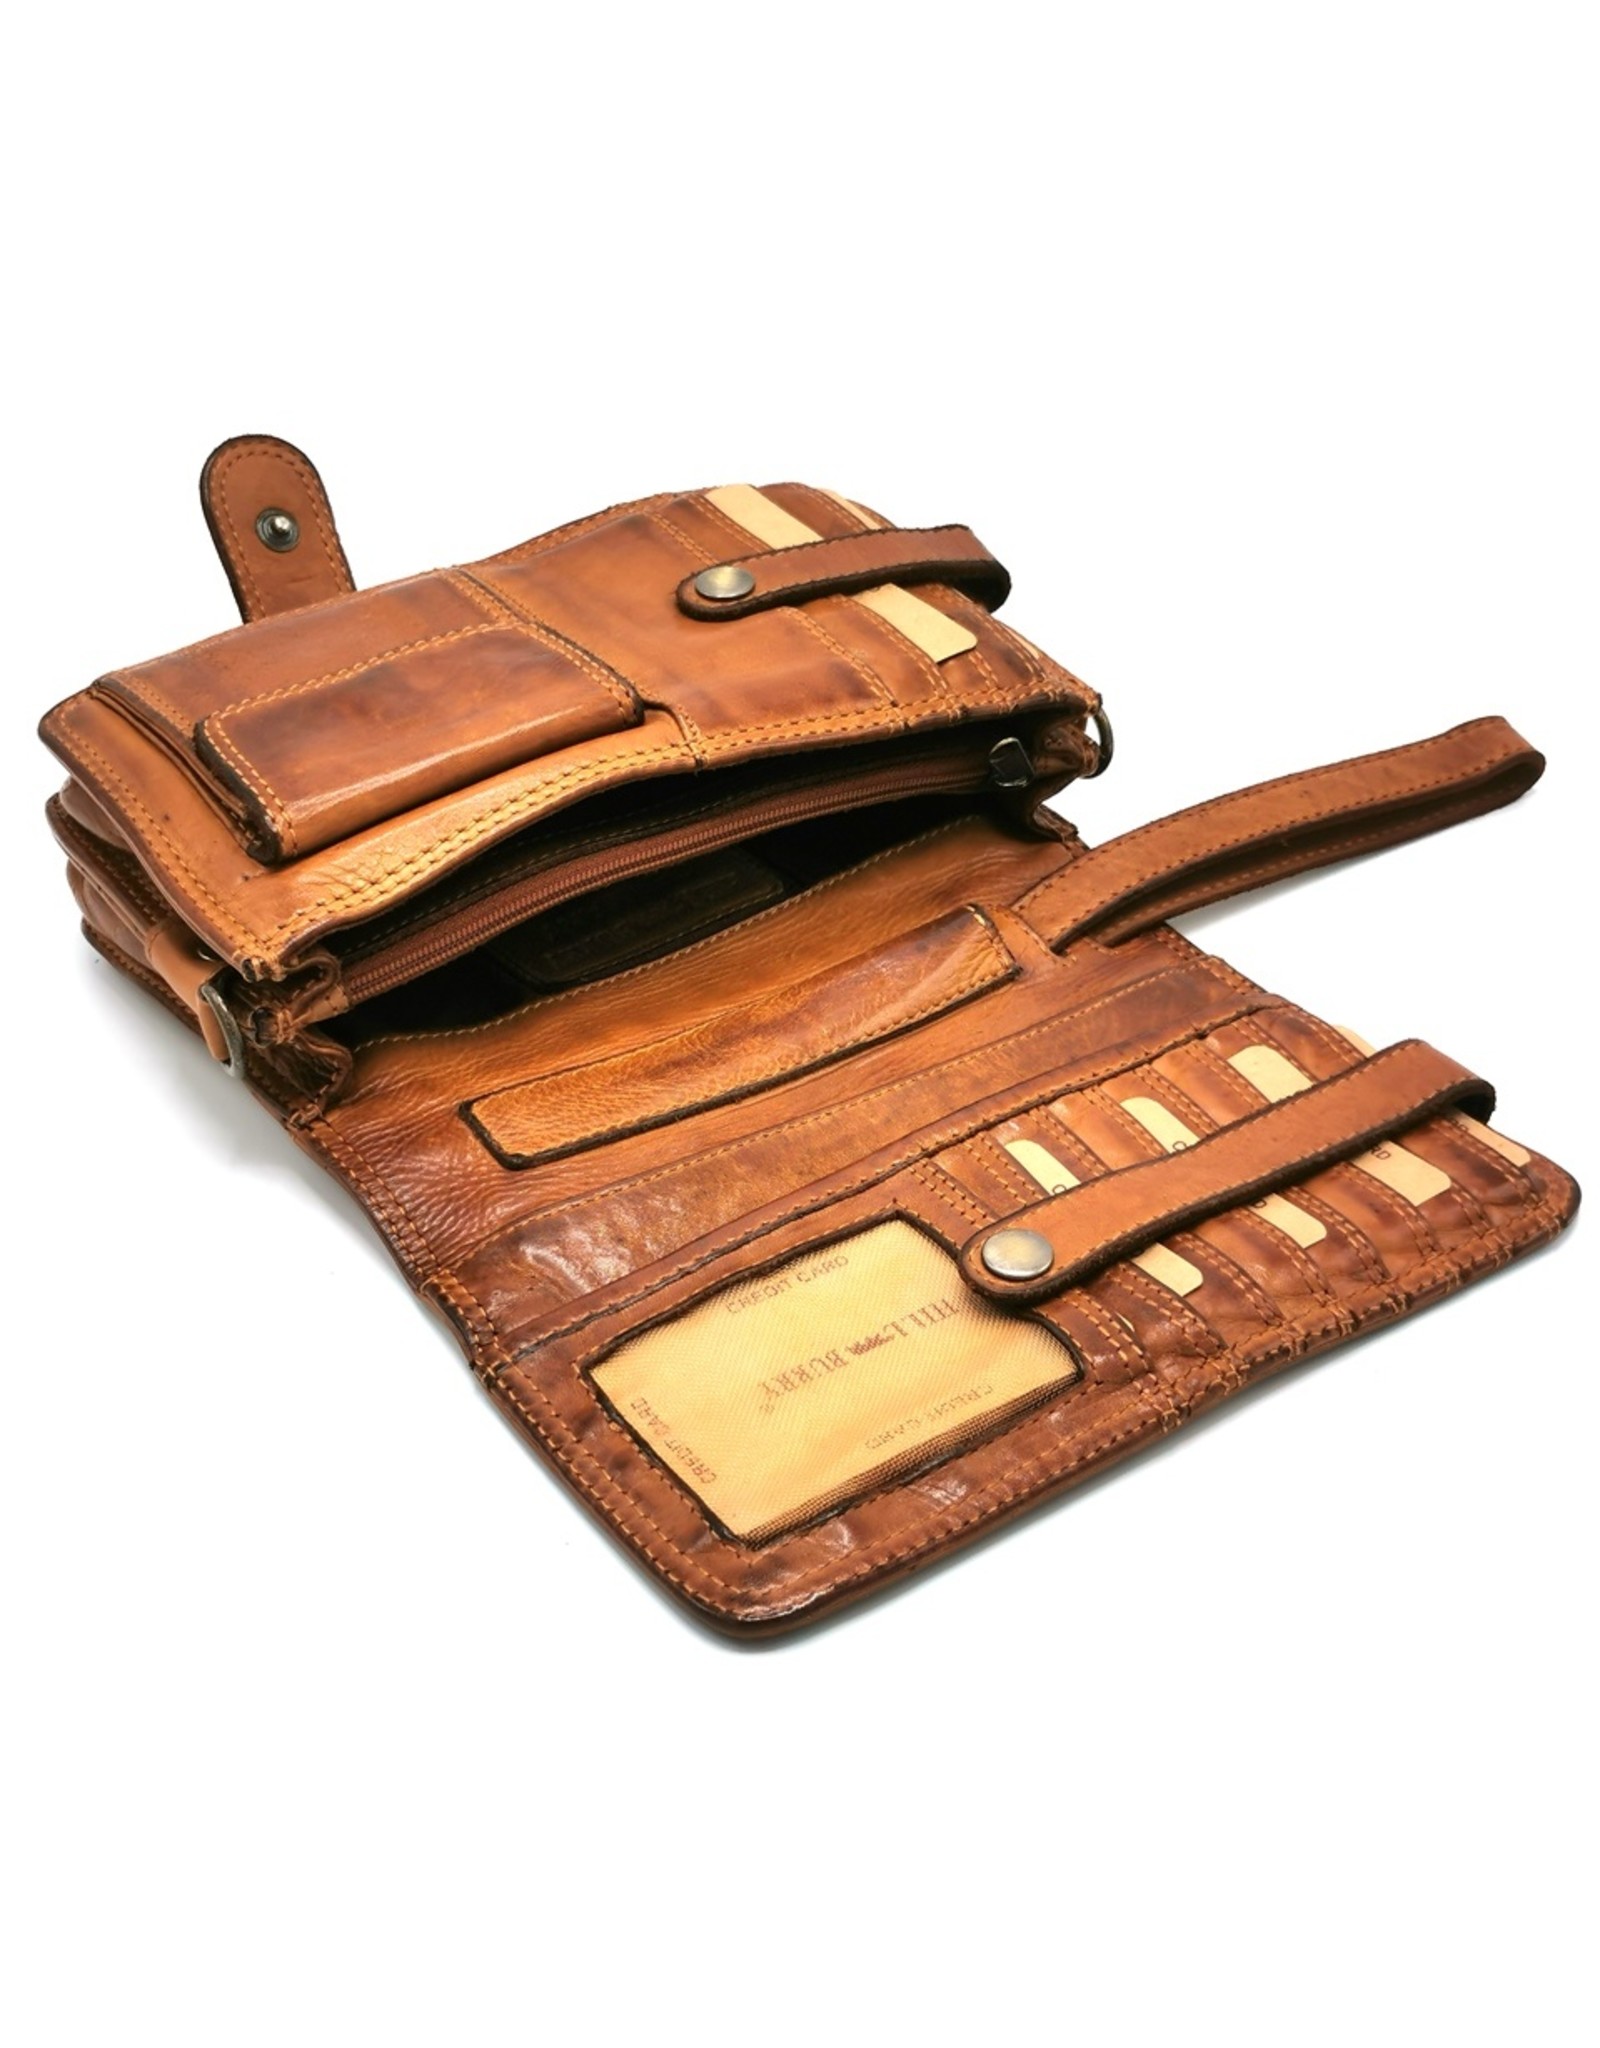 HillBurry Leather Festival bags, waist bags and belt bags - HillBurry Shoulder Bag-Wallet-Phone holder washed leather